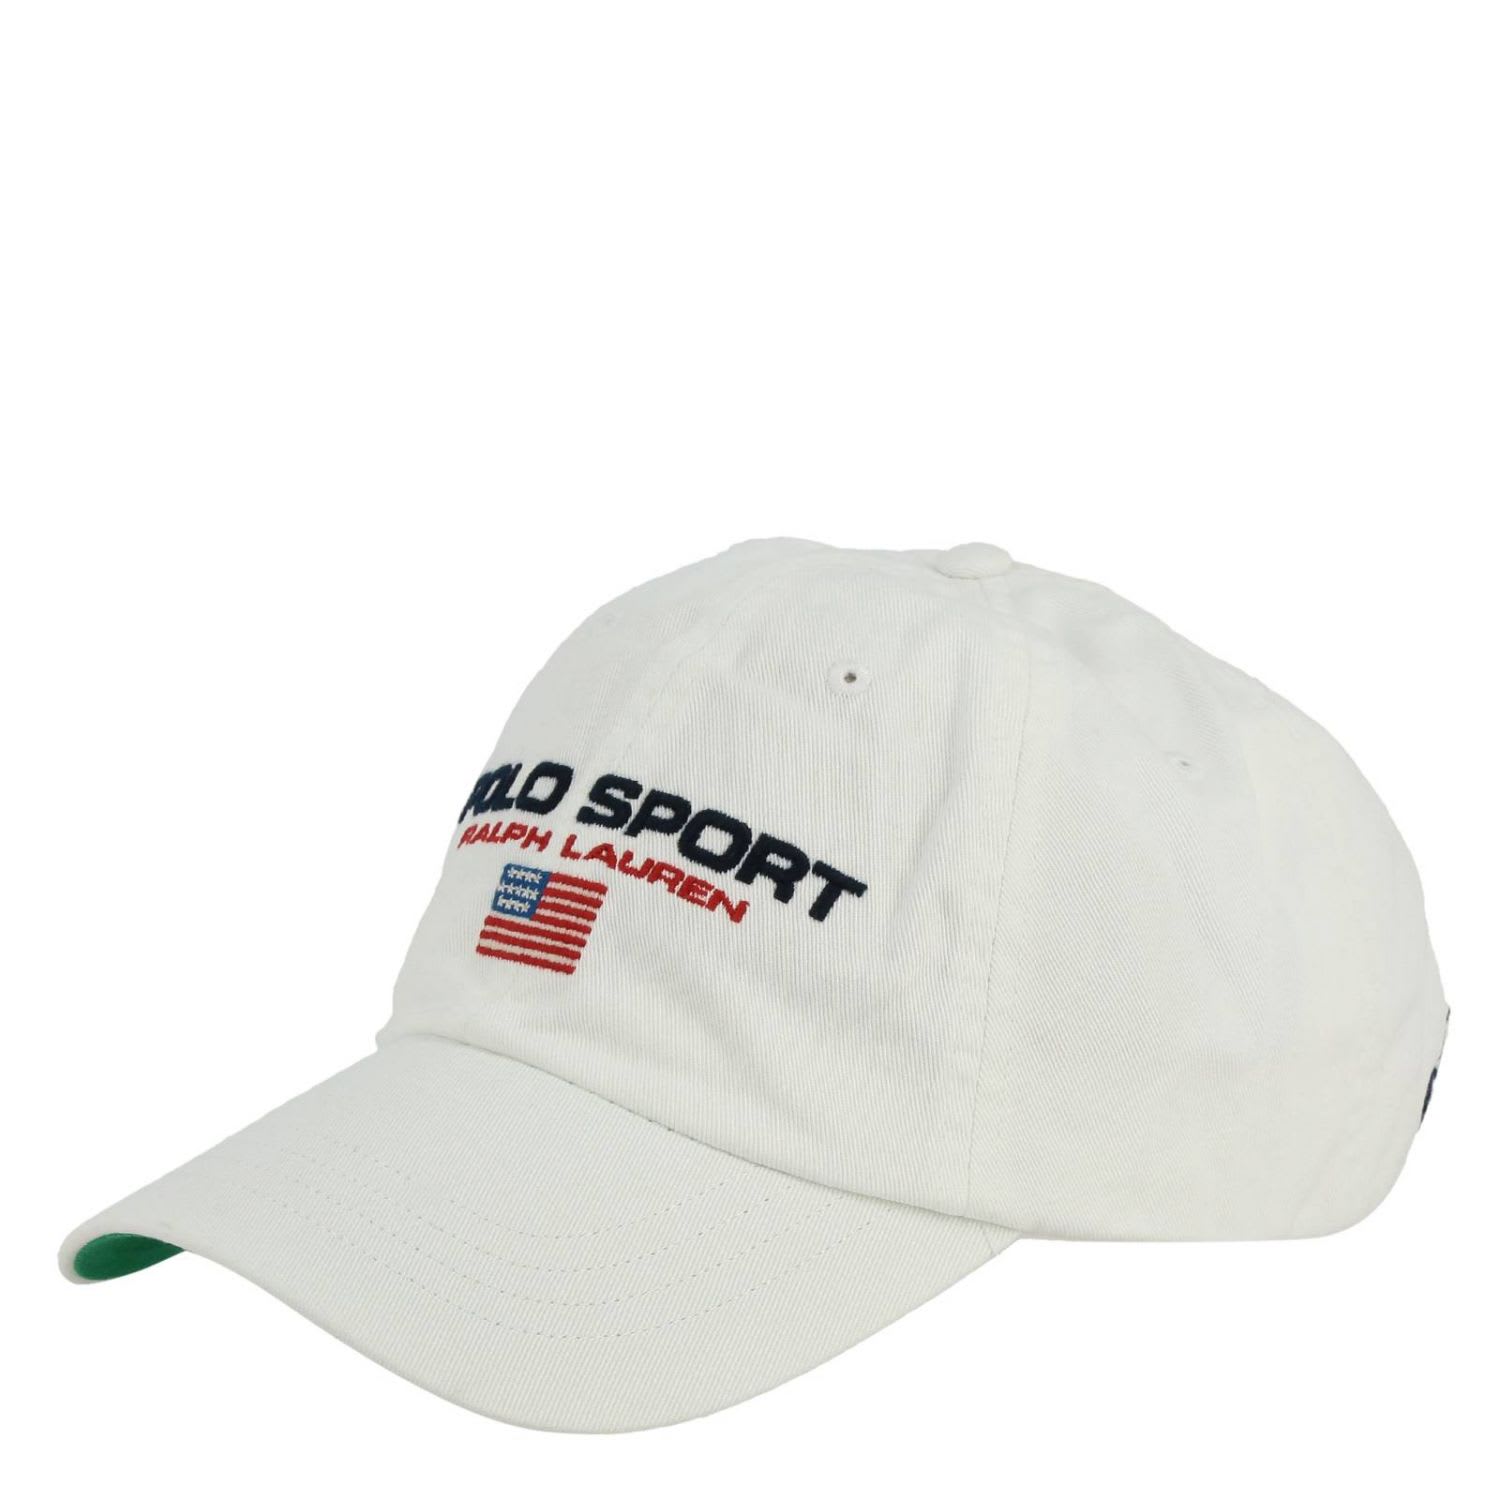 POLO RALPH LAUREN BASEBALL HAT IN COTTON WITH LOGO,11048660